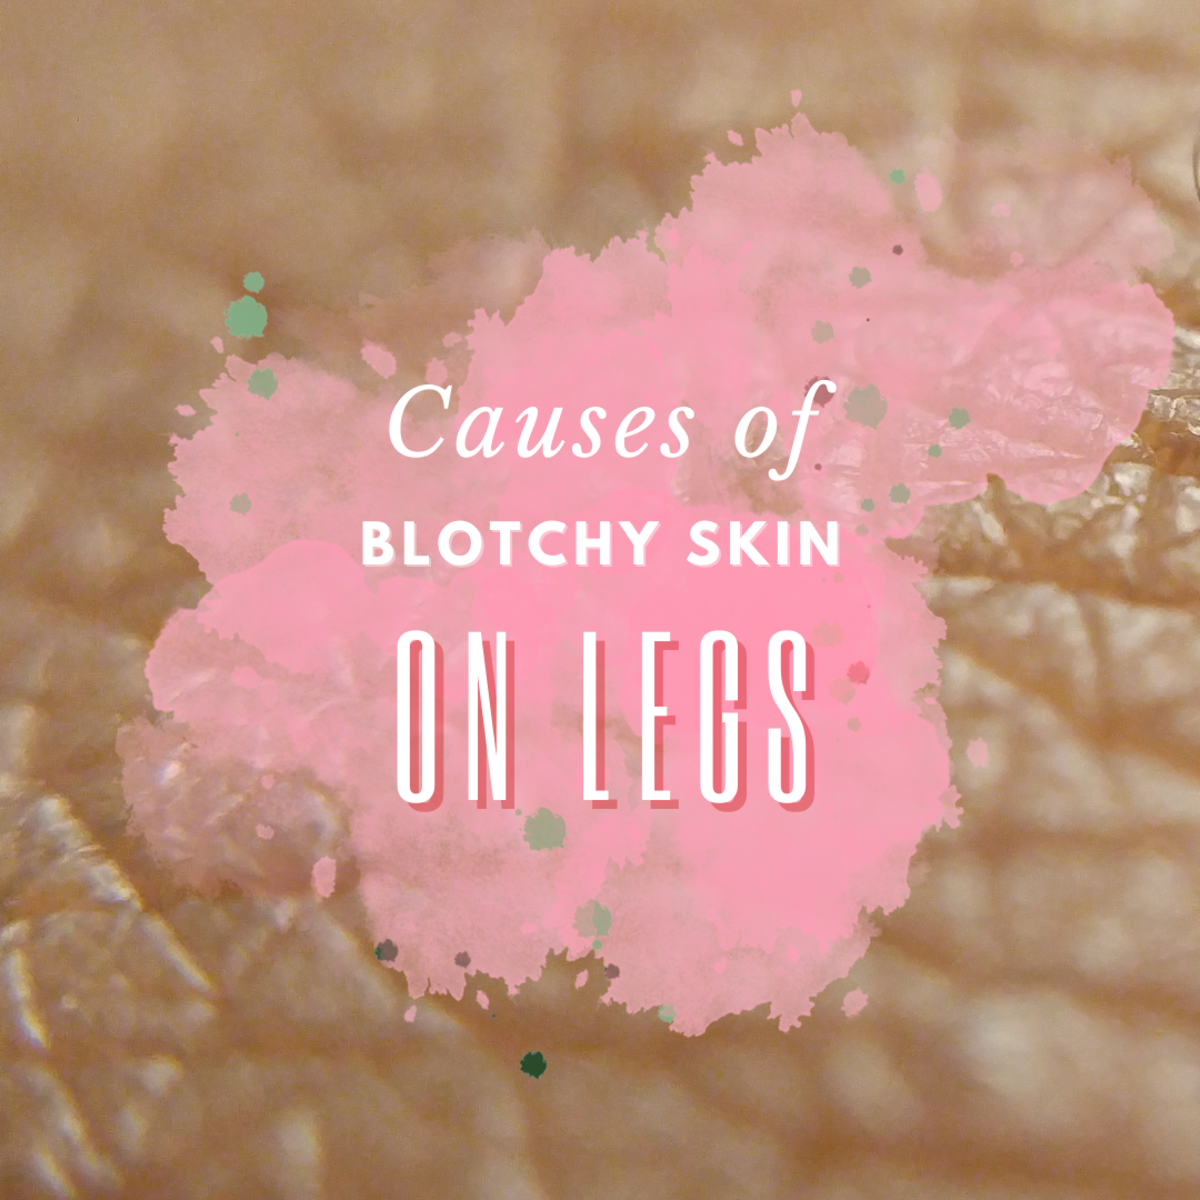 Blotchy skin on the legs has several potential causes—read on to find out more.